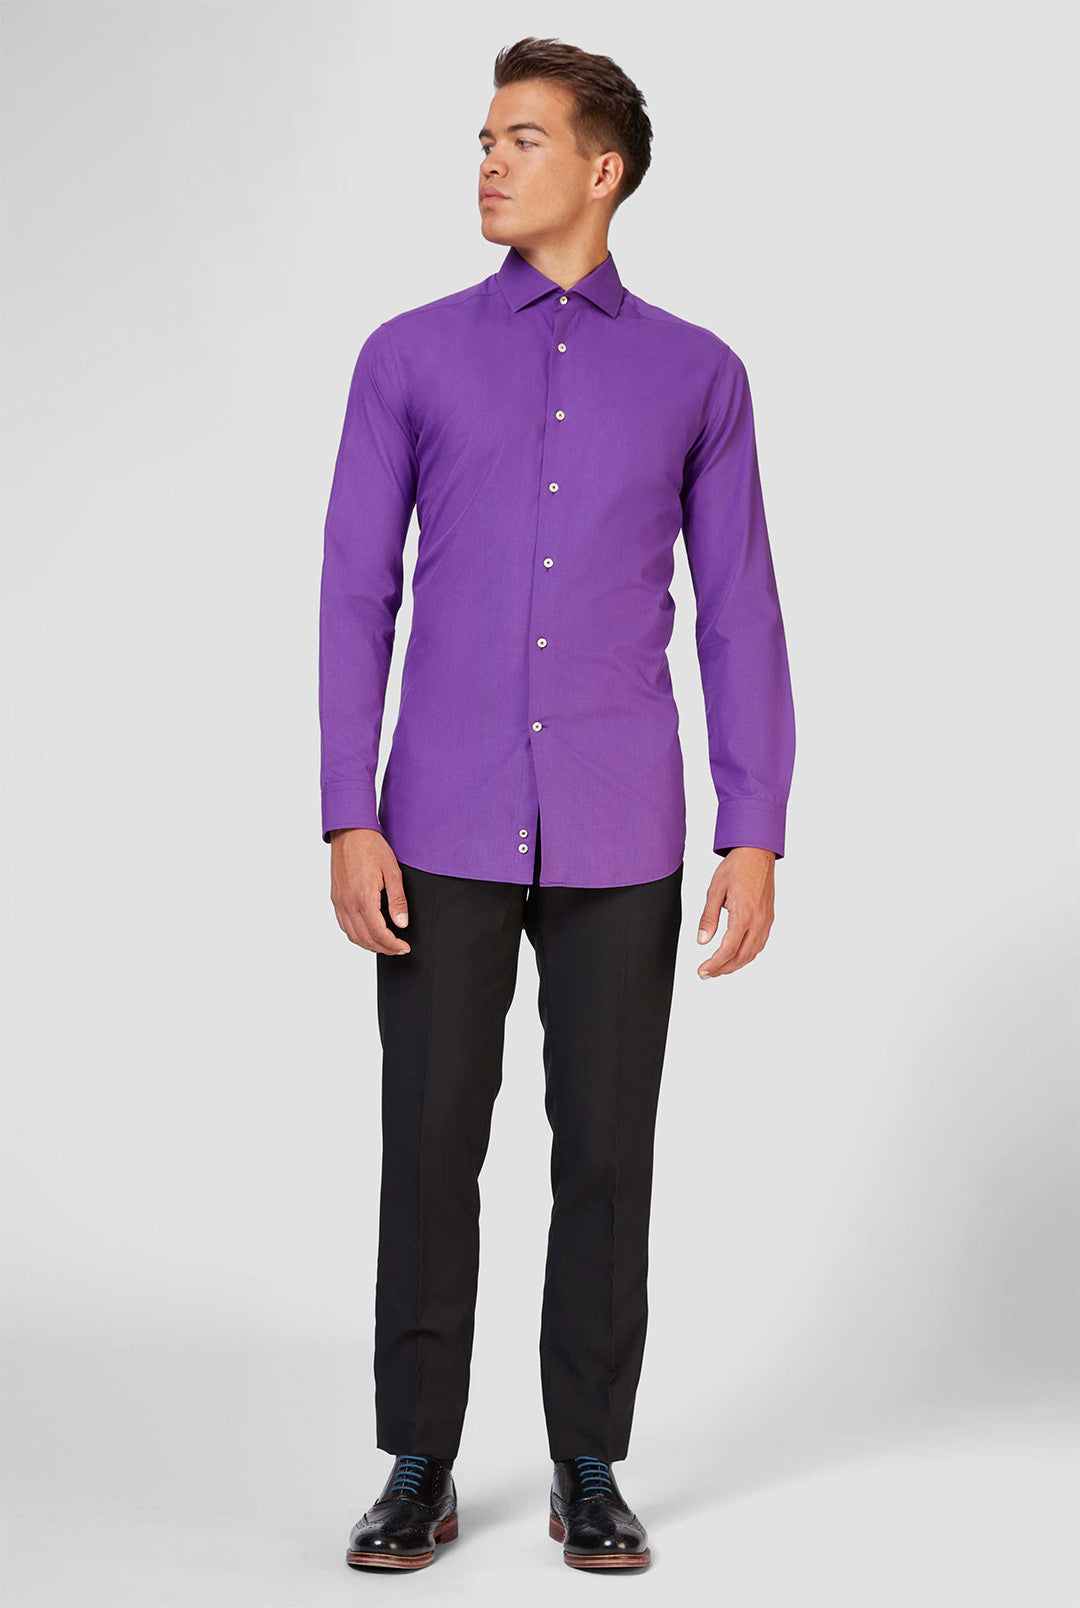 Woman Wearing Purple Shirt And Black Pants Picture. Image: 109922623